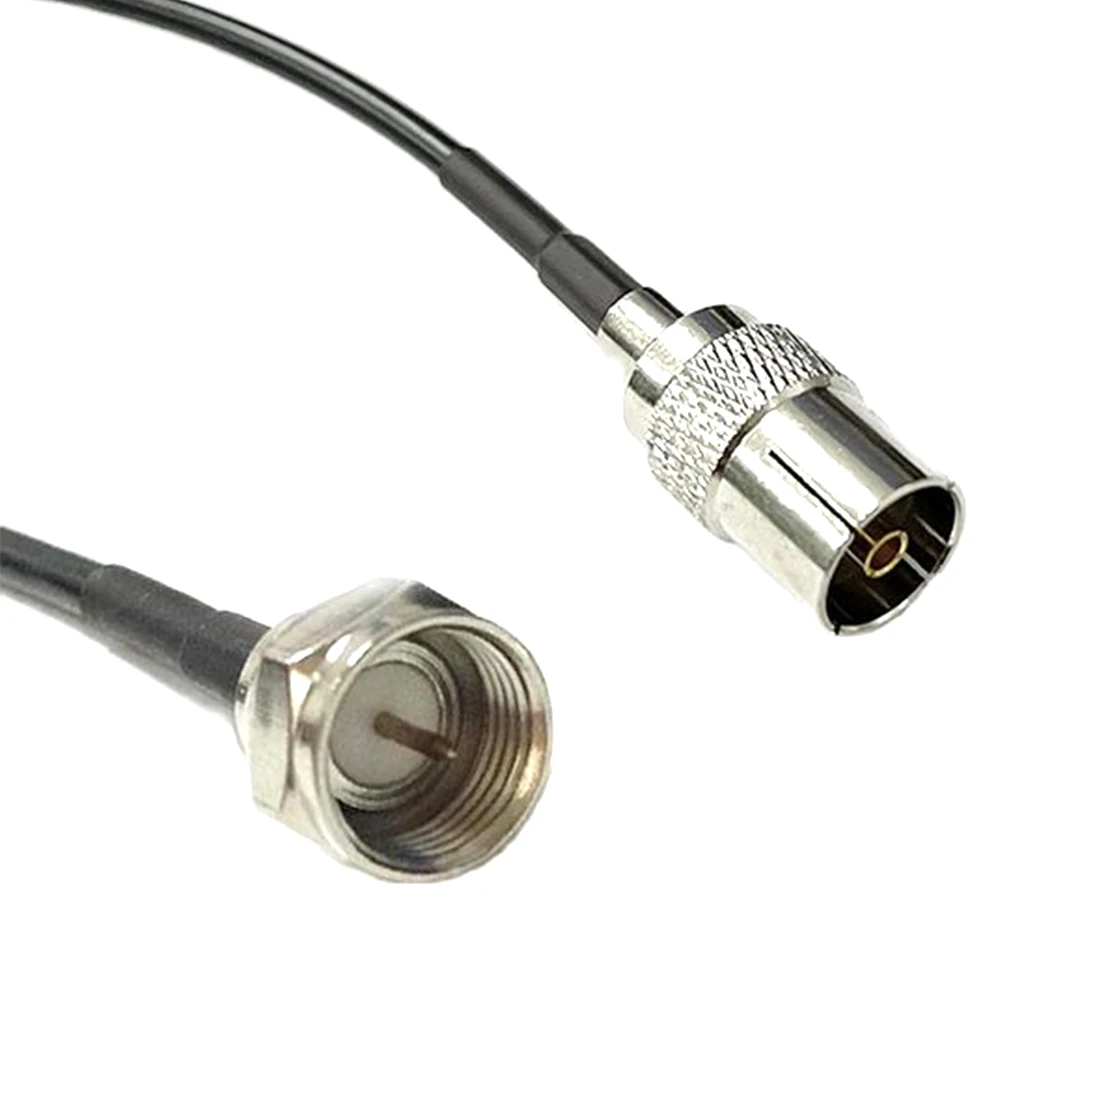 RG174 Cable IEC PAL DVB-T To SMA / F TV Male Plug & Female Jack RF Jumper Pigtail Adapter 20cm